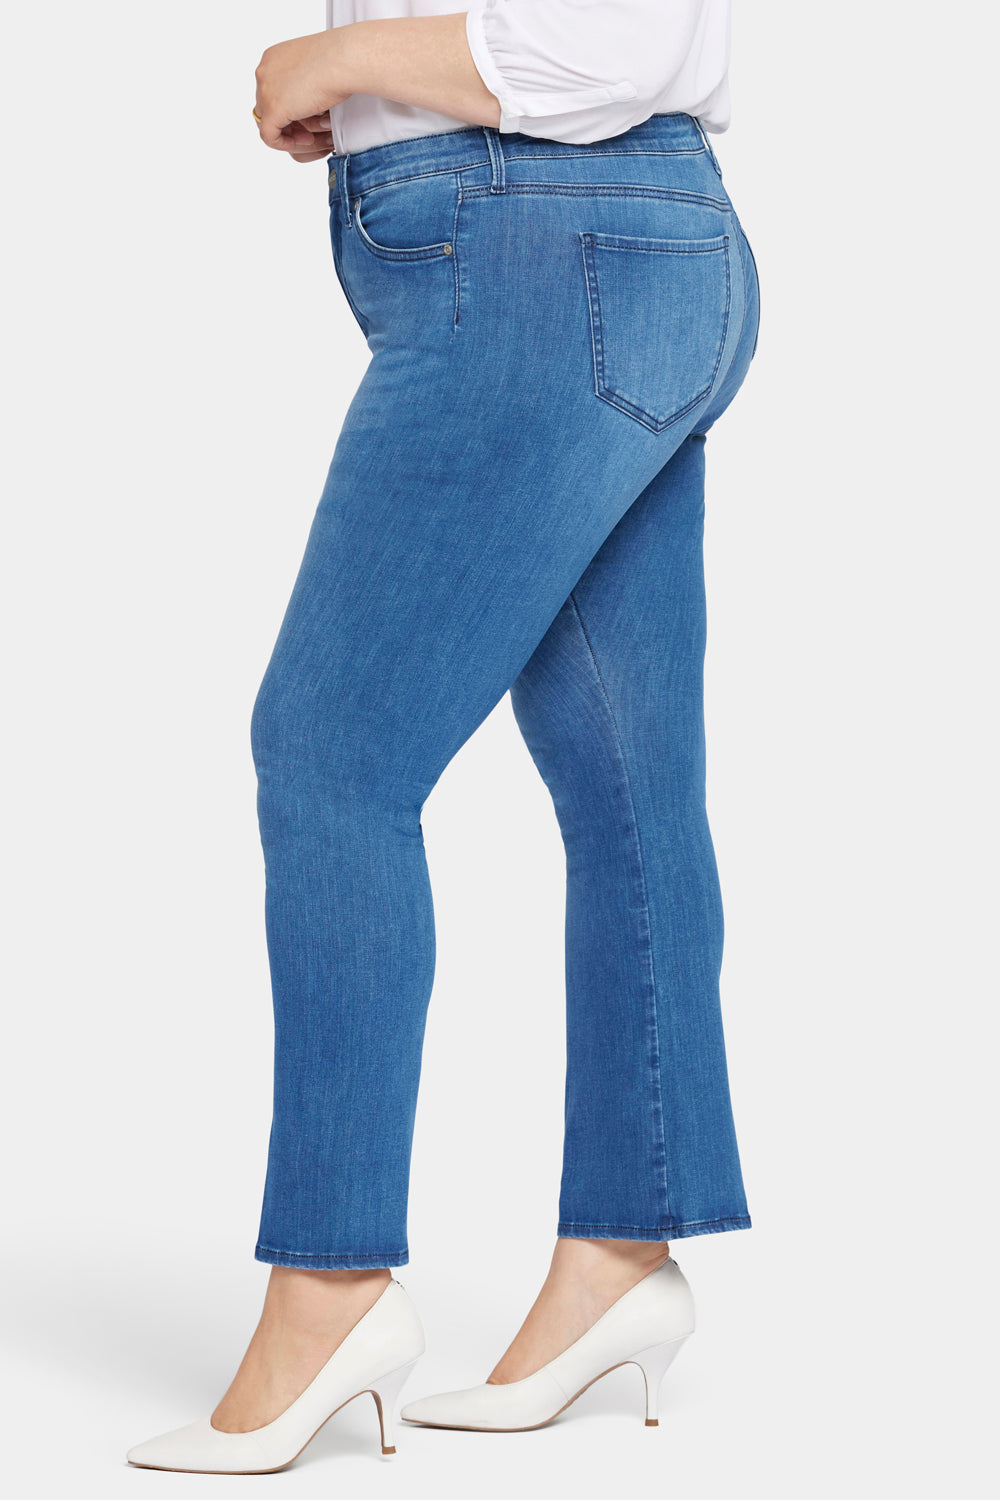 Le Silhouette Sheri Slim Jeans In Tall With 34 Inseam - Stunning Blue